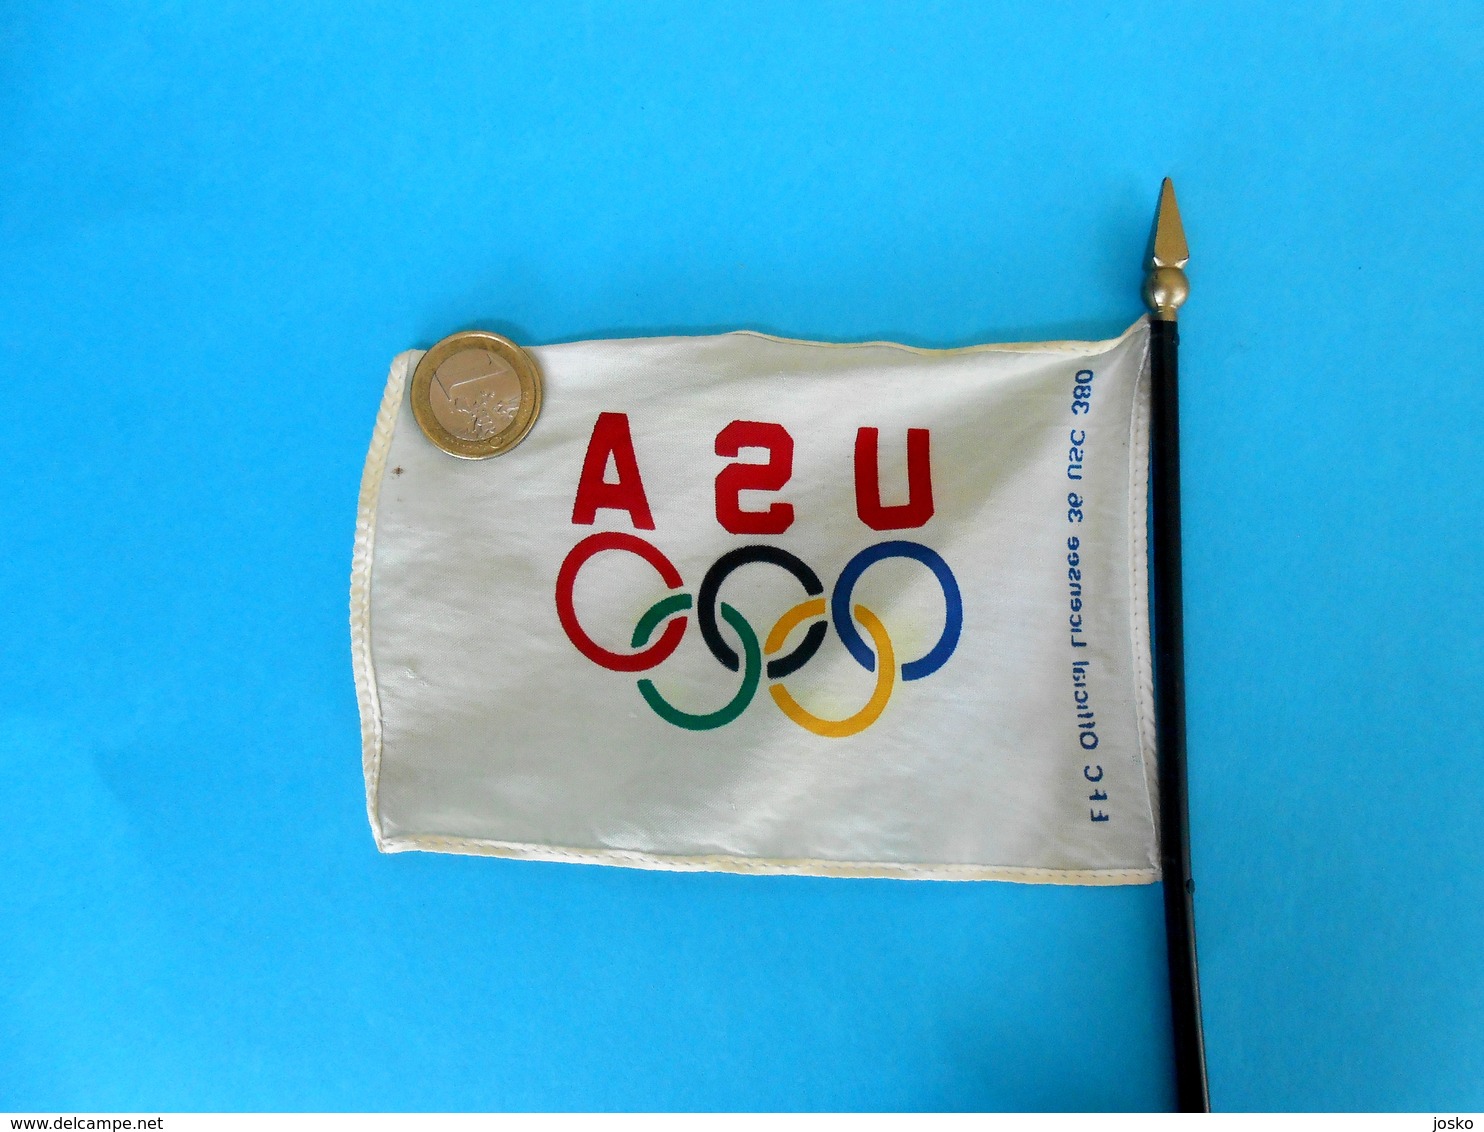 USA NOC .... Original Vintage Official Olympics Table Pennant * Olympic Games Jeux Olympiques Olympia Olympiad Olympiade - Uniformes Recordatorios & Misc